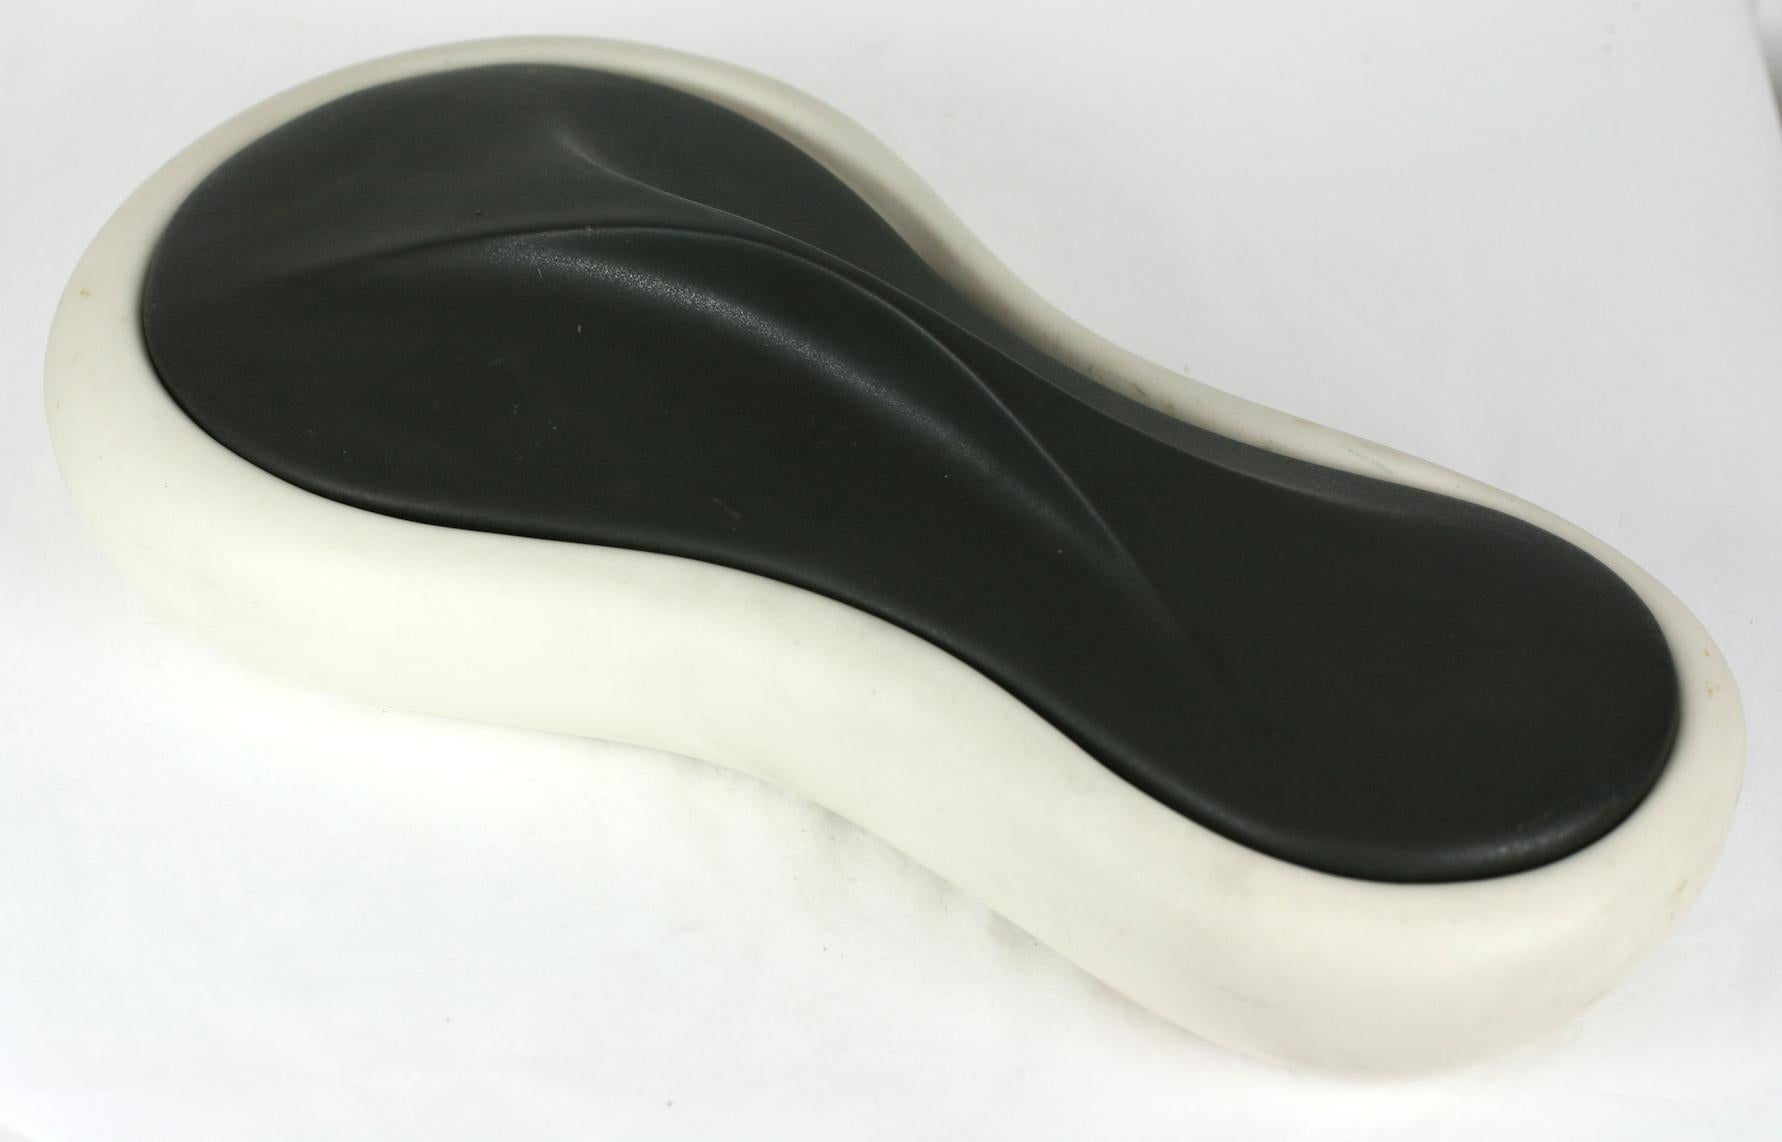 Covered pottery dish by Industrial designer Arno Scheiding from the 1950s. Great combination of colors in matte white and matte black highlight the elegant lines and biomorphic midcentury form. The handle is formed by a gently raised curve in the